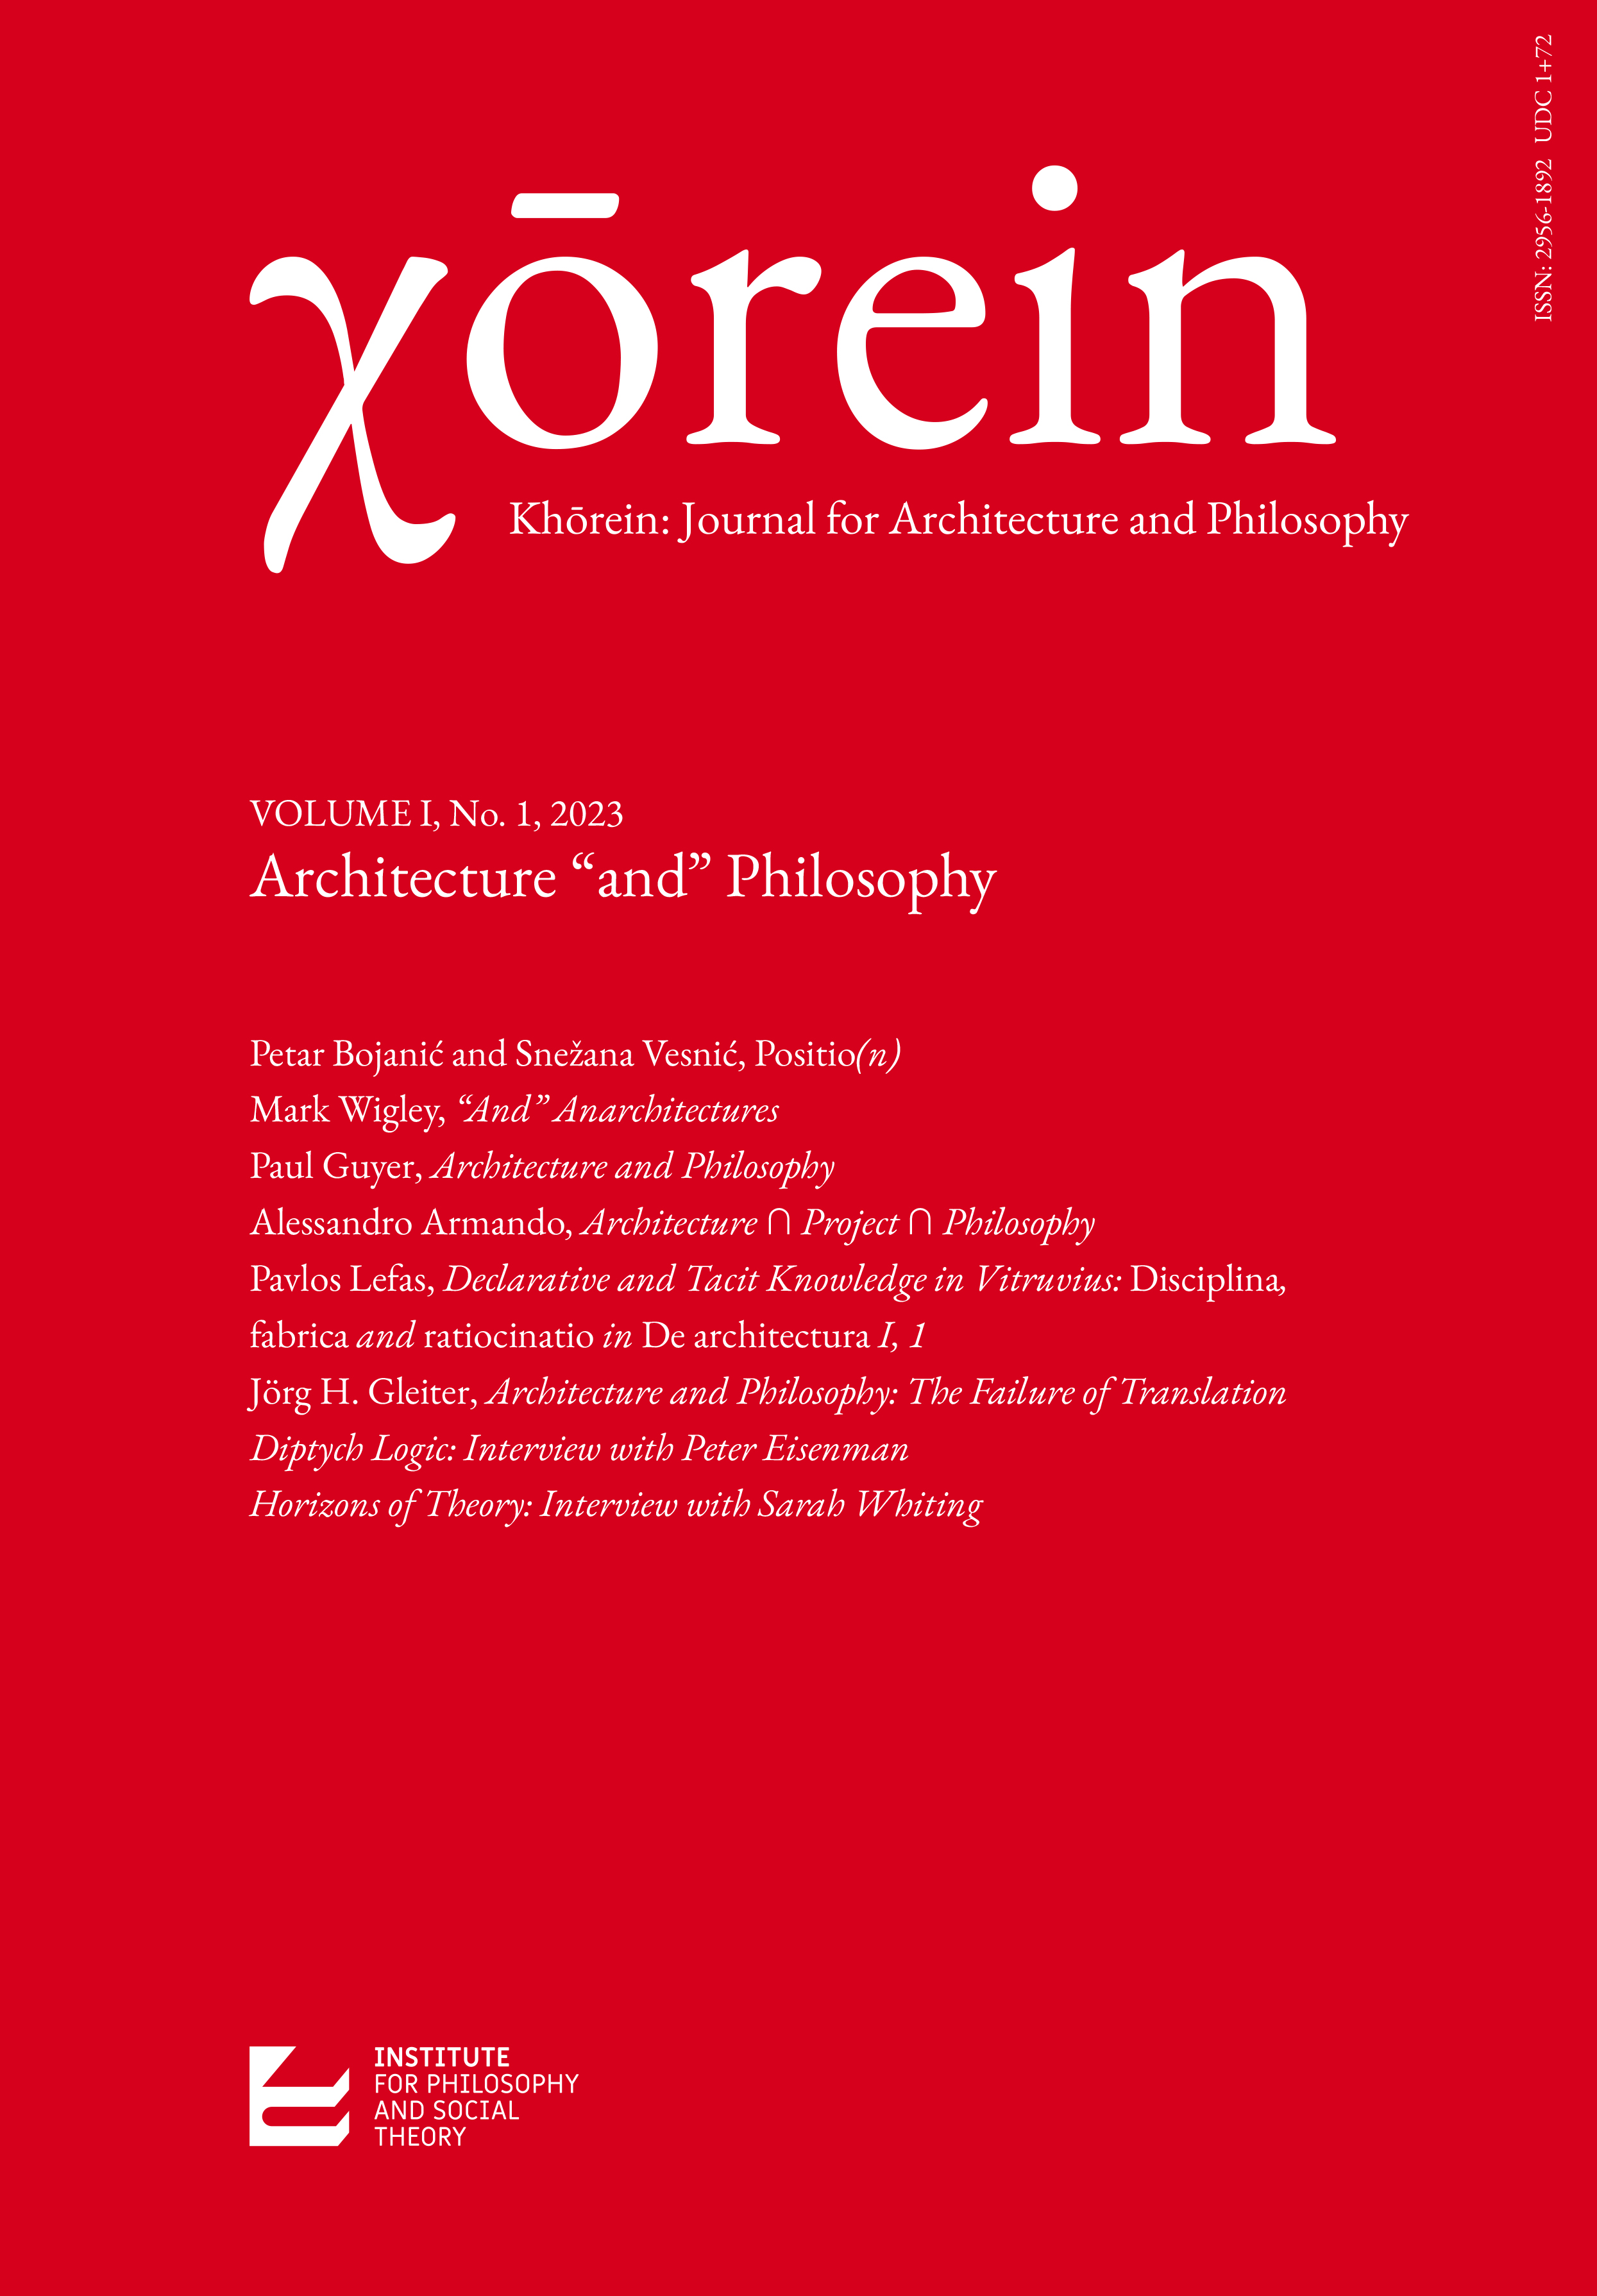 “And” Anarchitectures